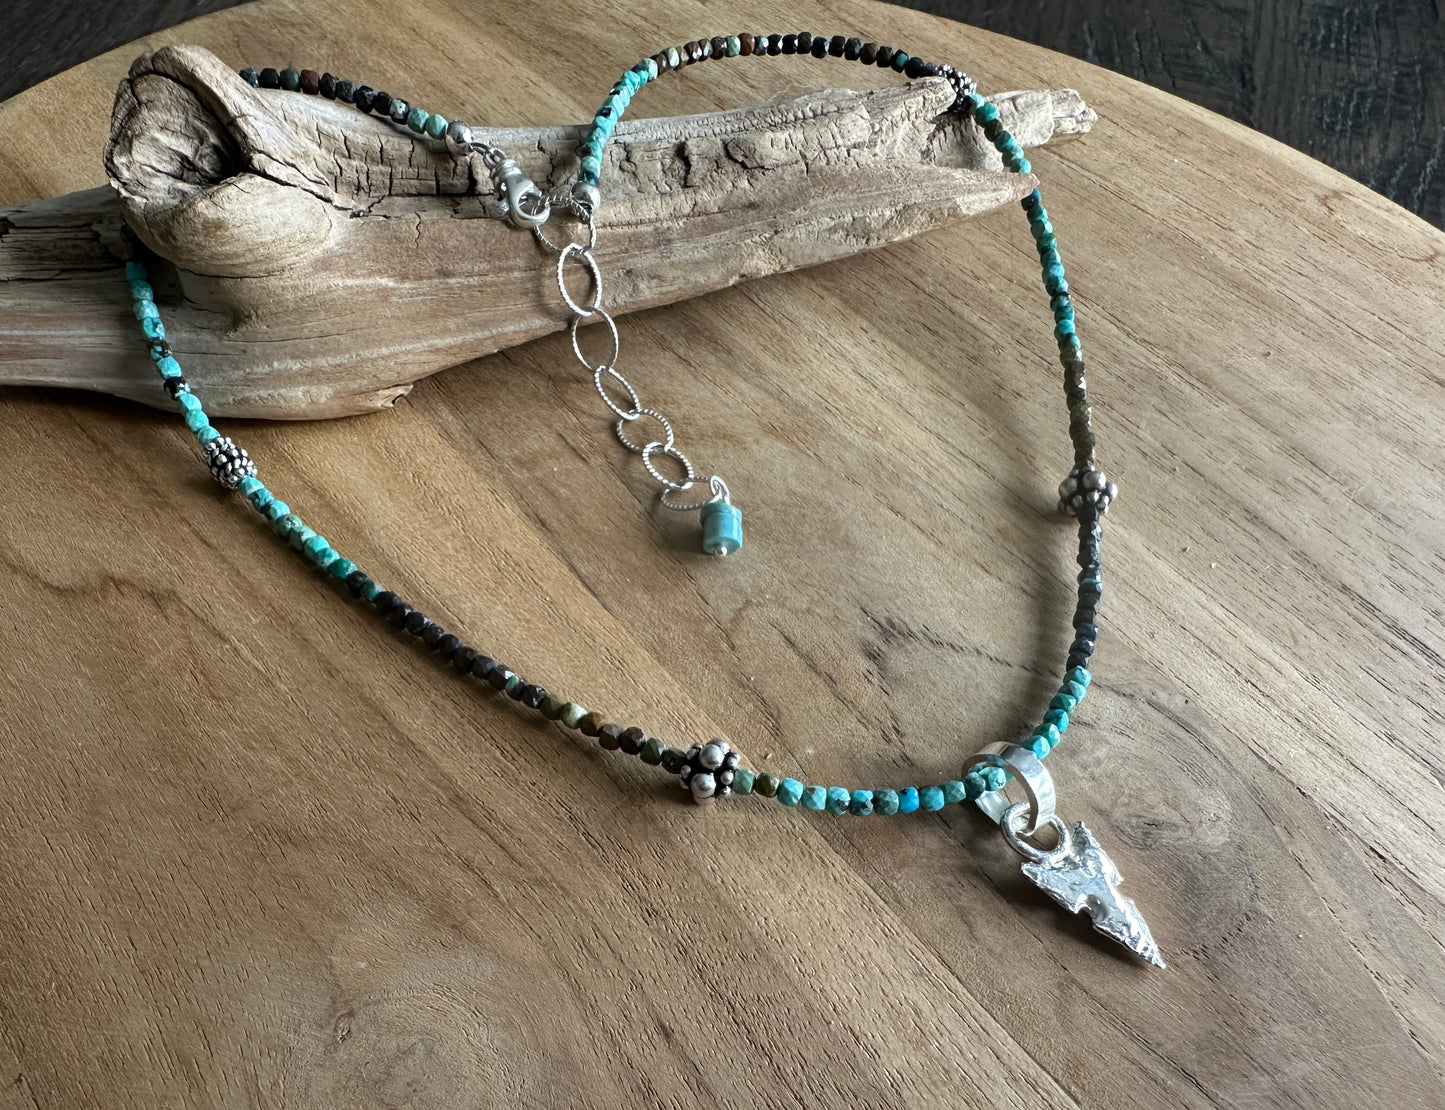 Turquoise Arrowhead Necklace